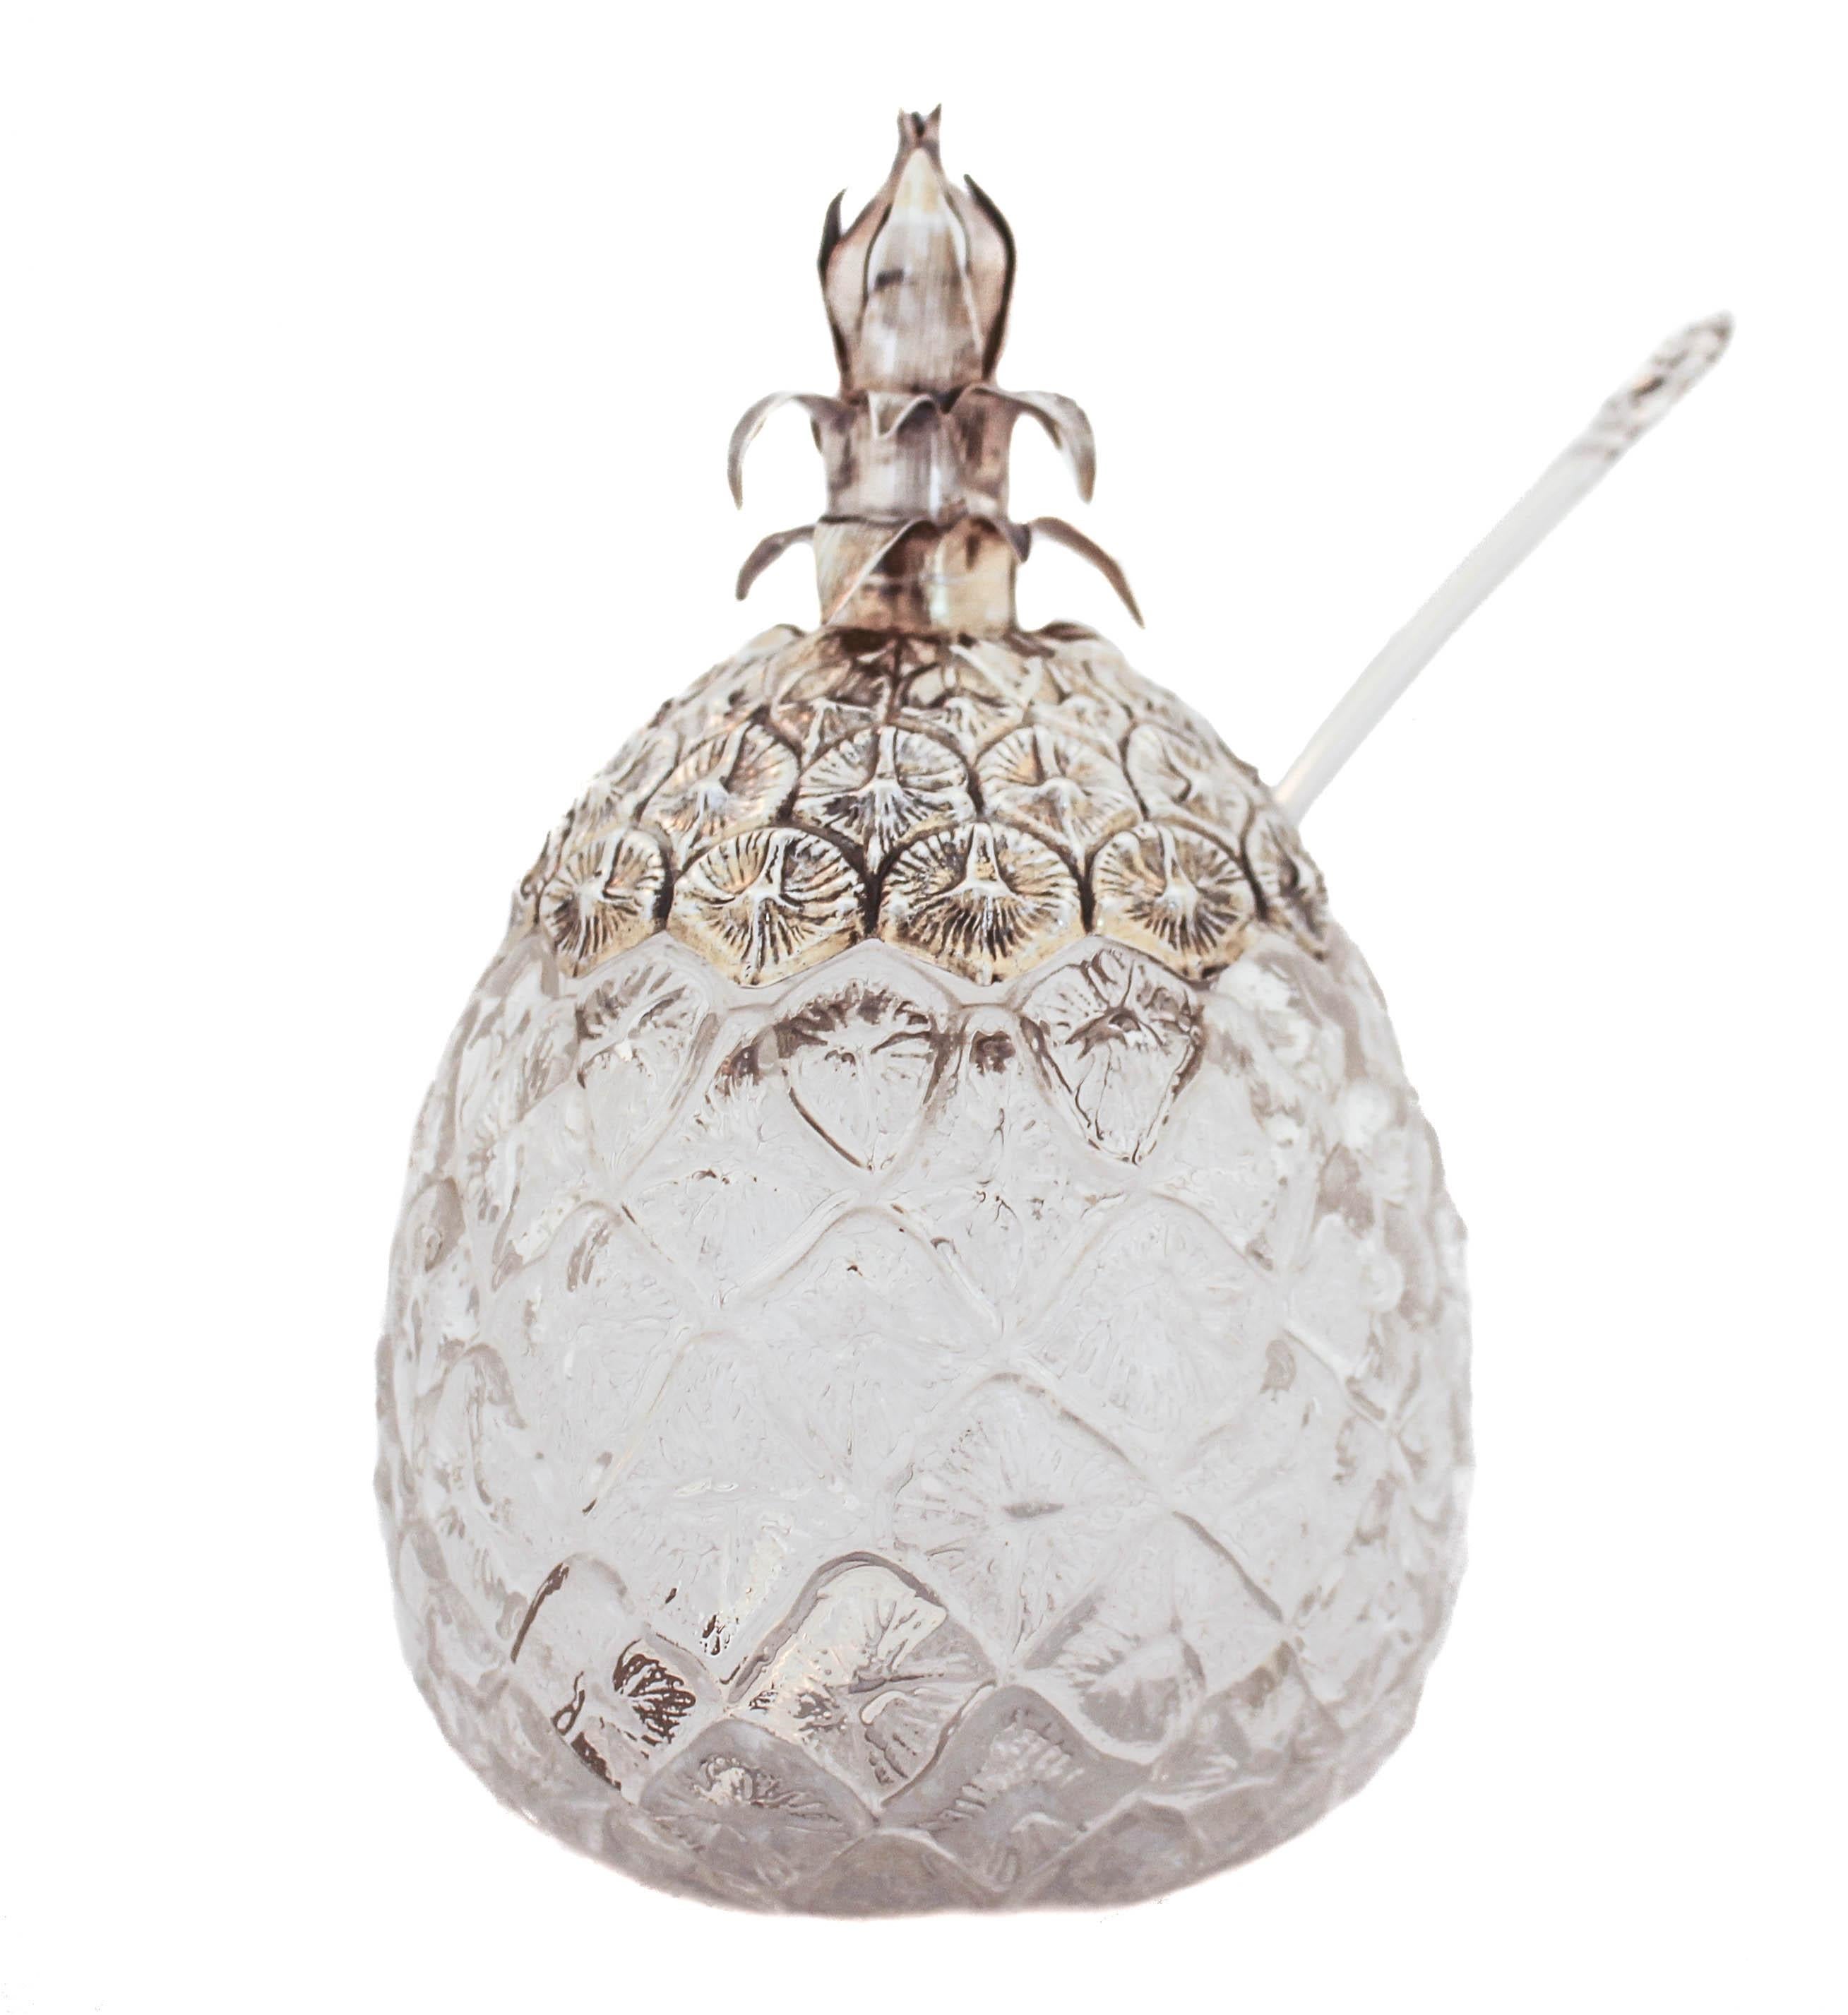 Being offered is a rare sterling silver and crystal jar shaped like a pineapple with a serving spoon.  The sterling lid is exactly like a pineapple crown — in shape and texture.  The crystal jar has frosted glass and texturized to feel and look like